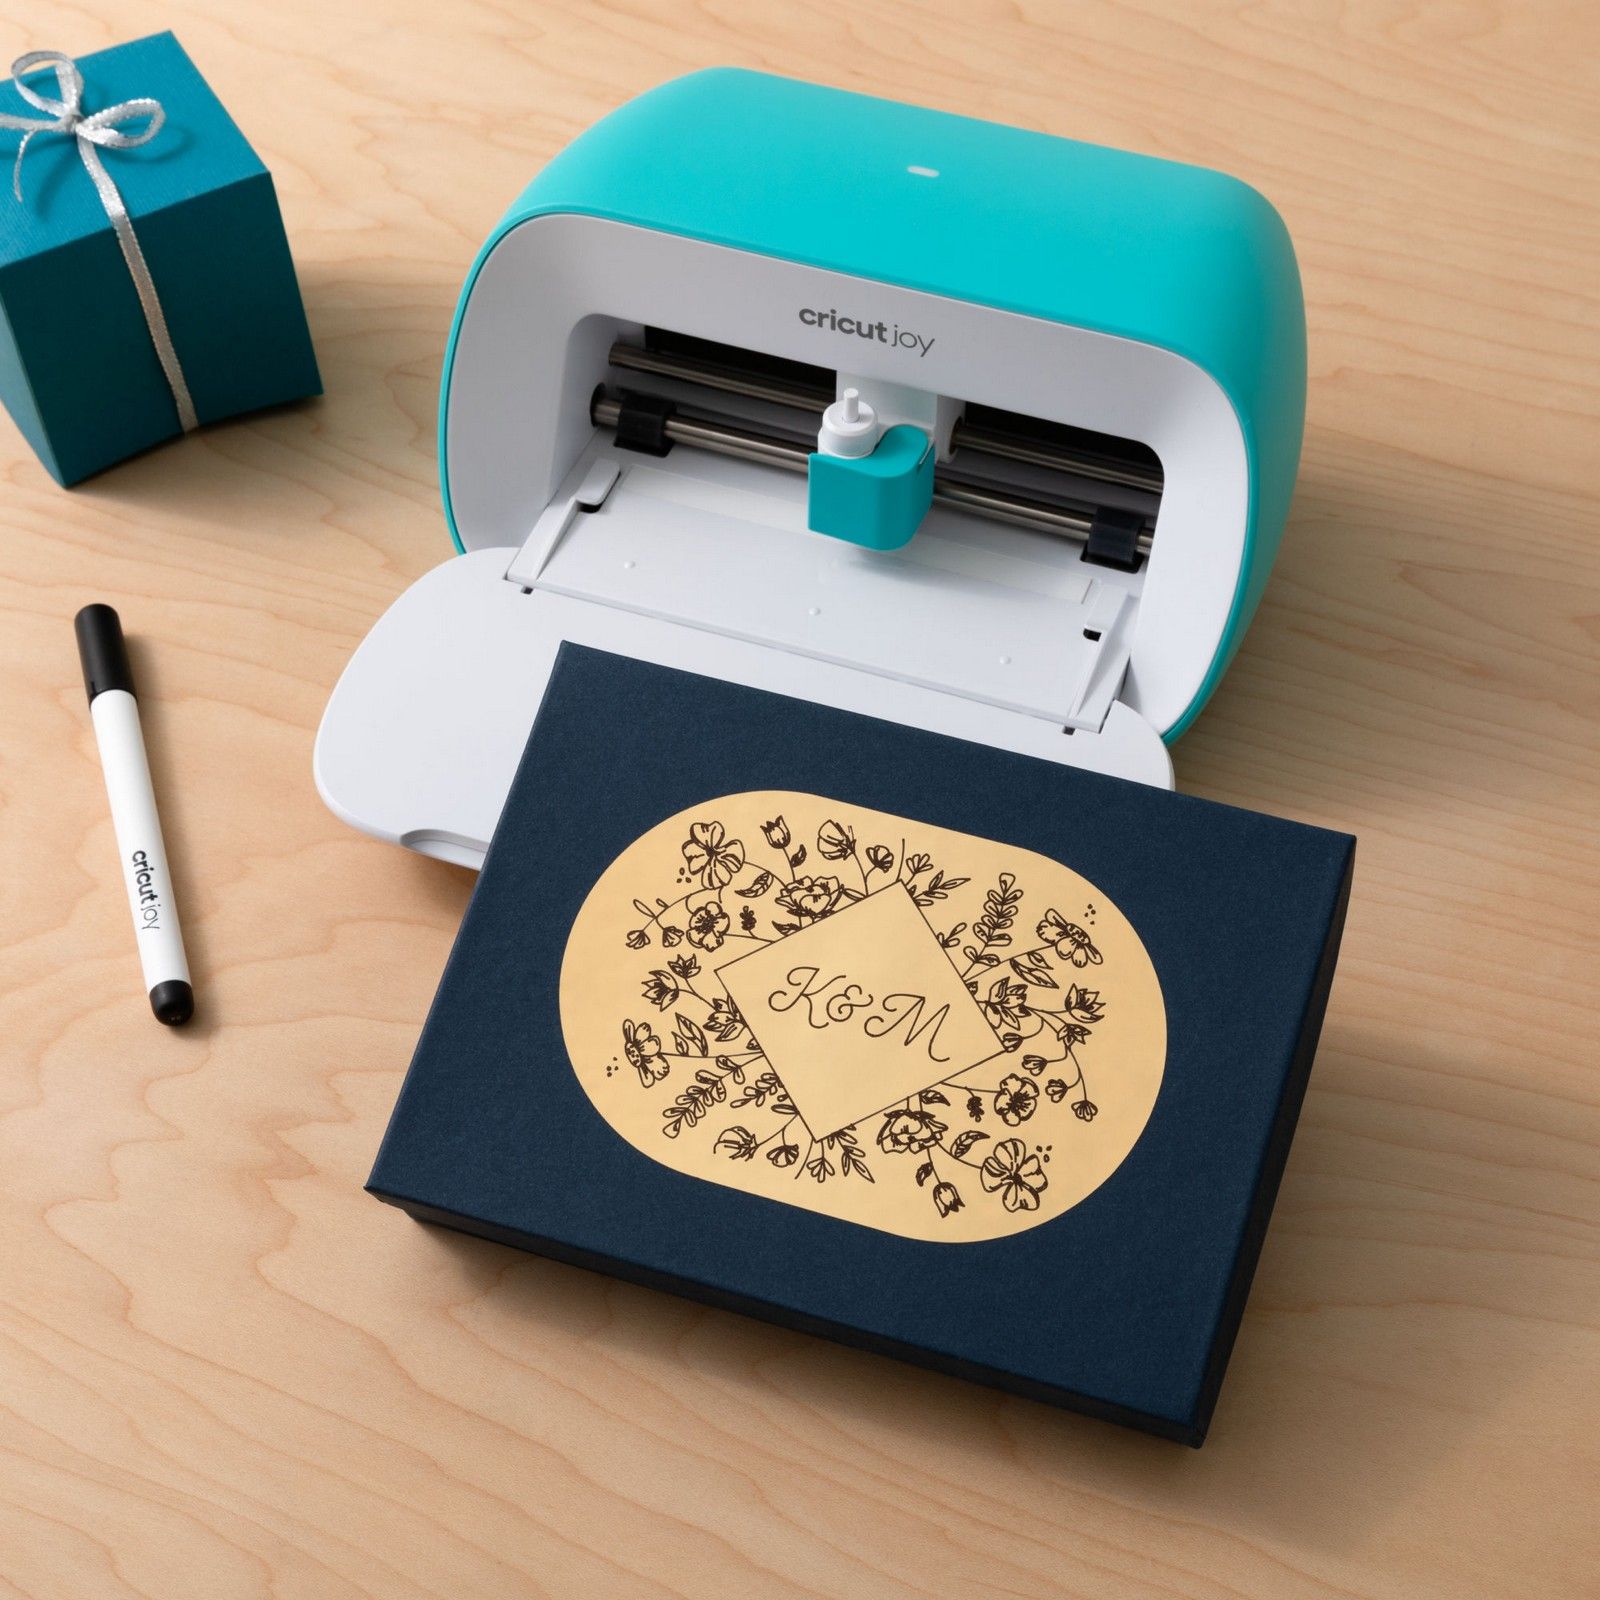 UNIVERSAL PEN ADAPTER Fits Cricut Joy, Draw With Any Pen or Pencil 